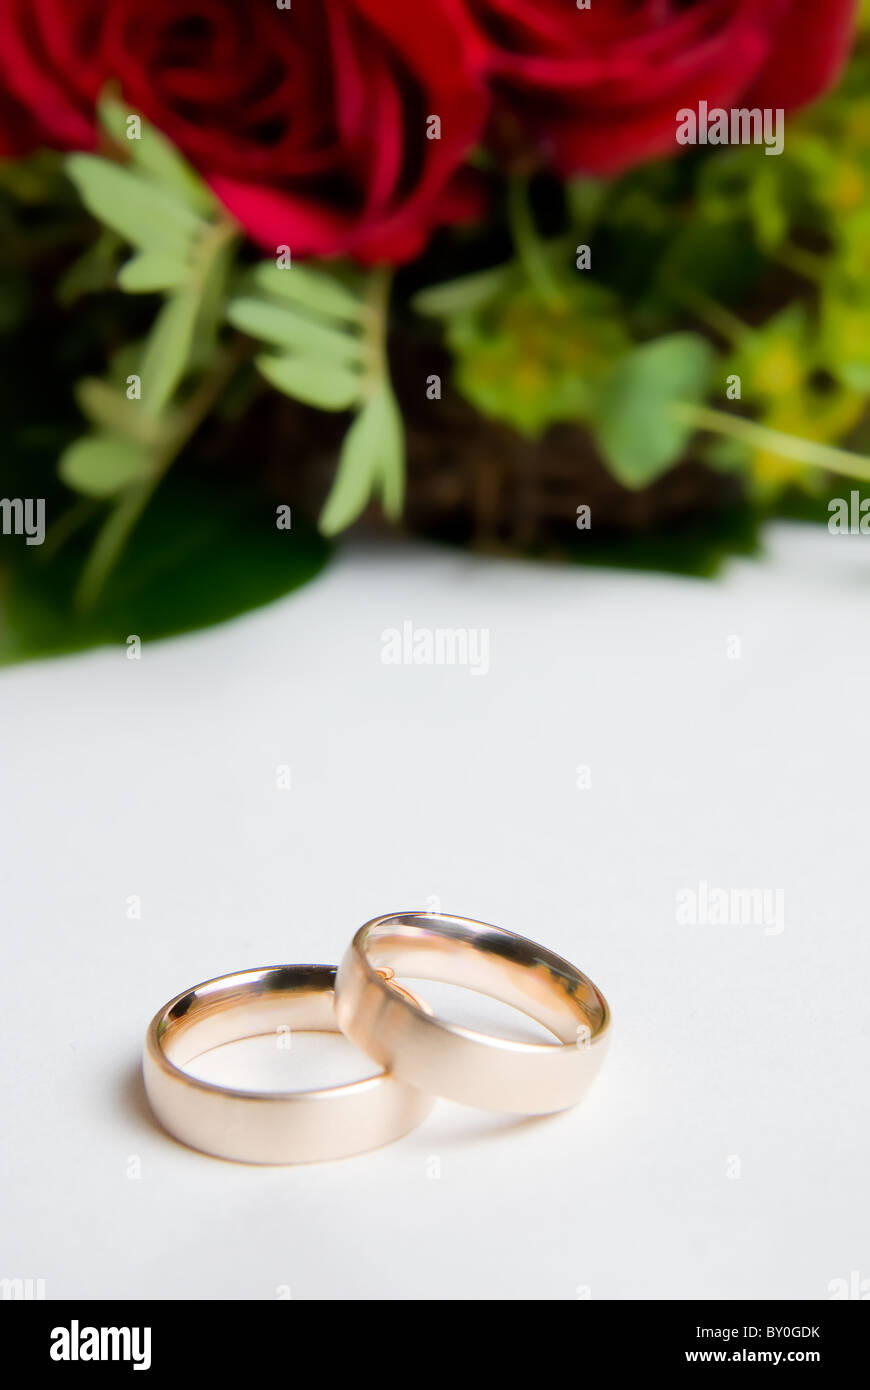 Two wedding rings in front of red roses Stock Photo